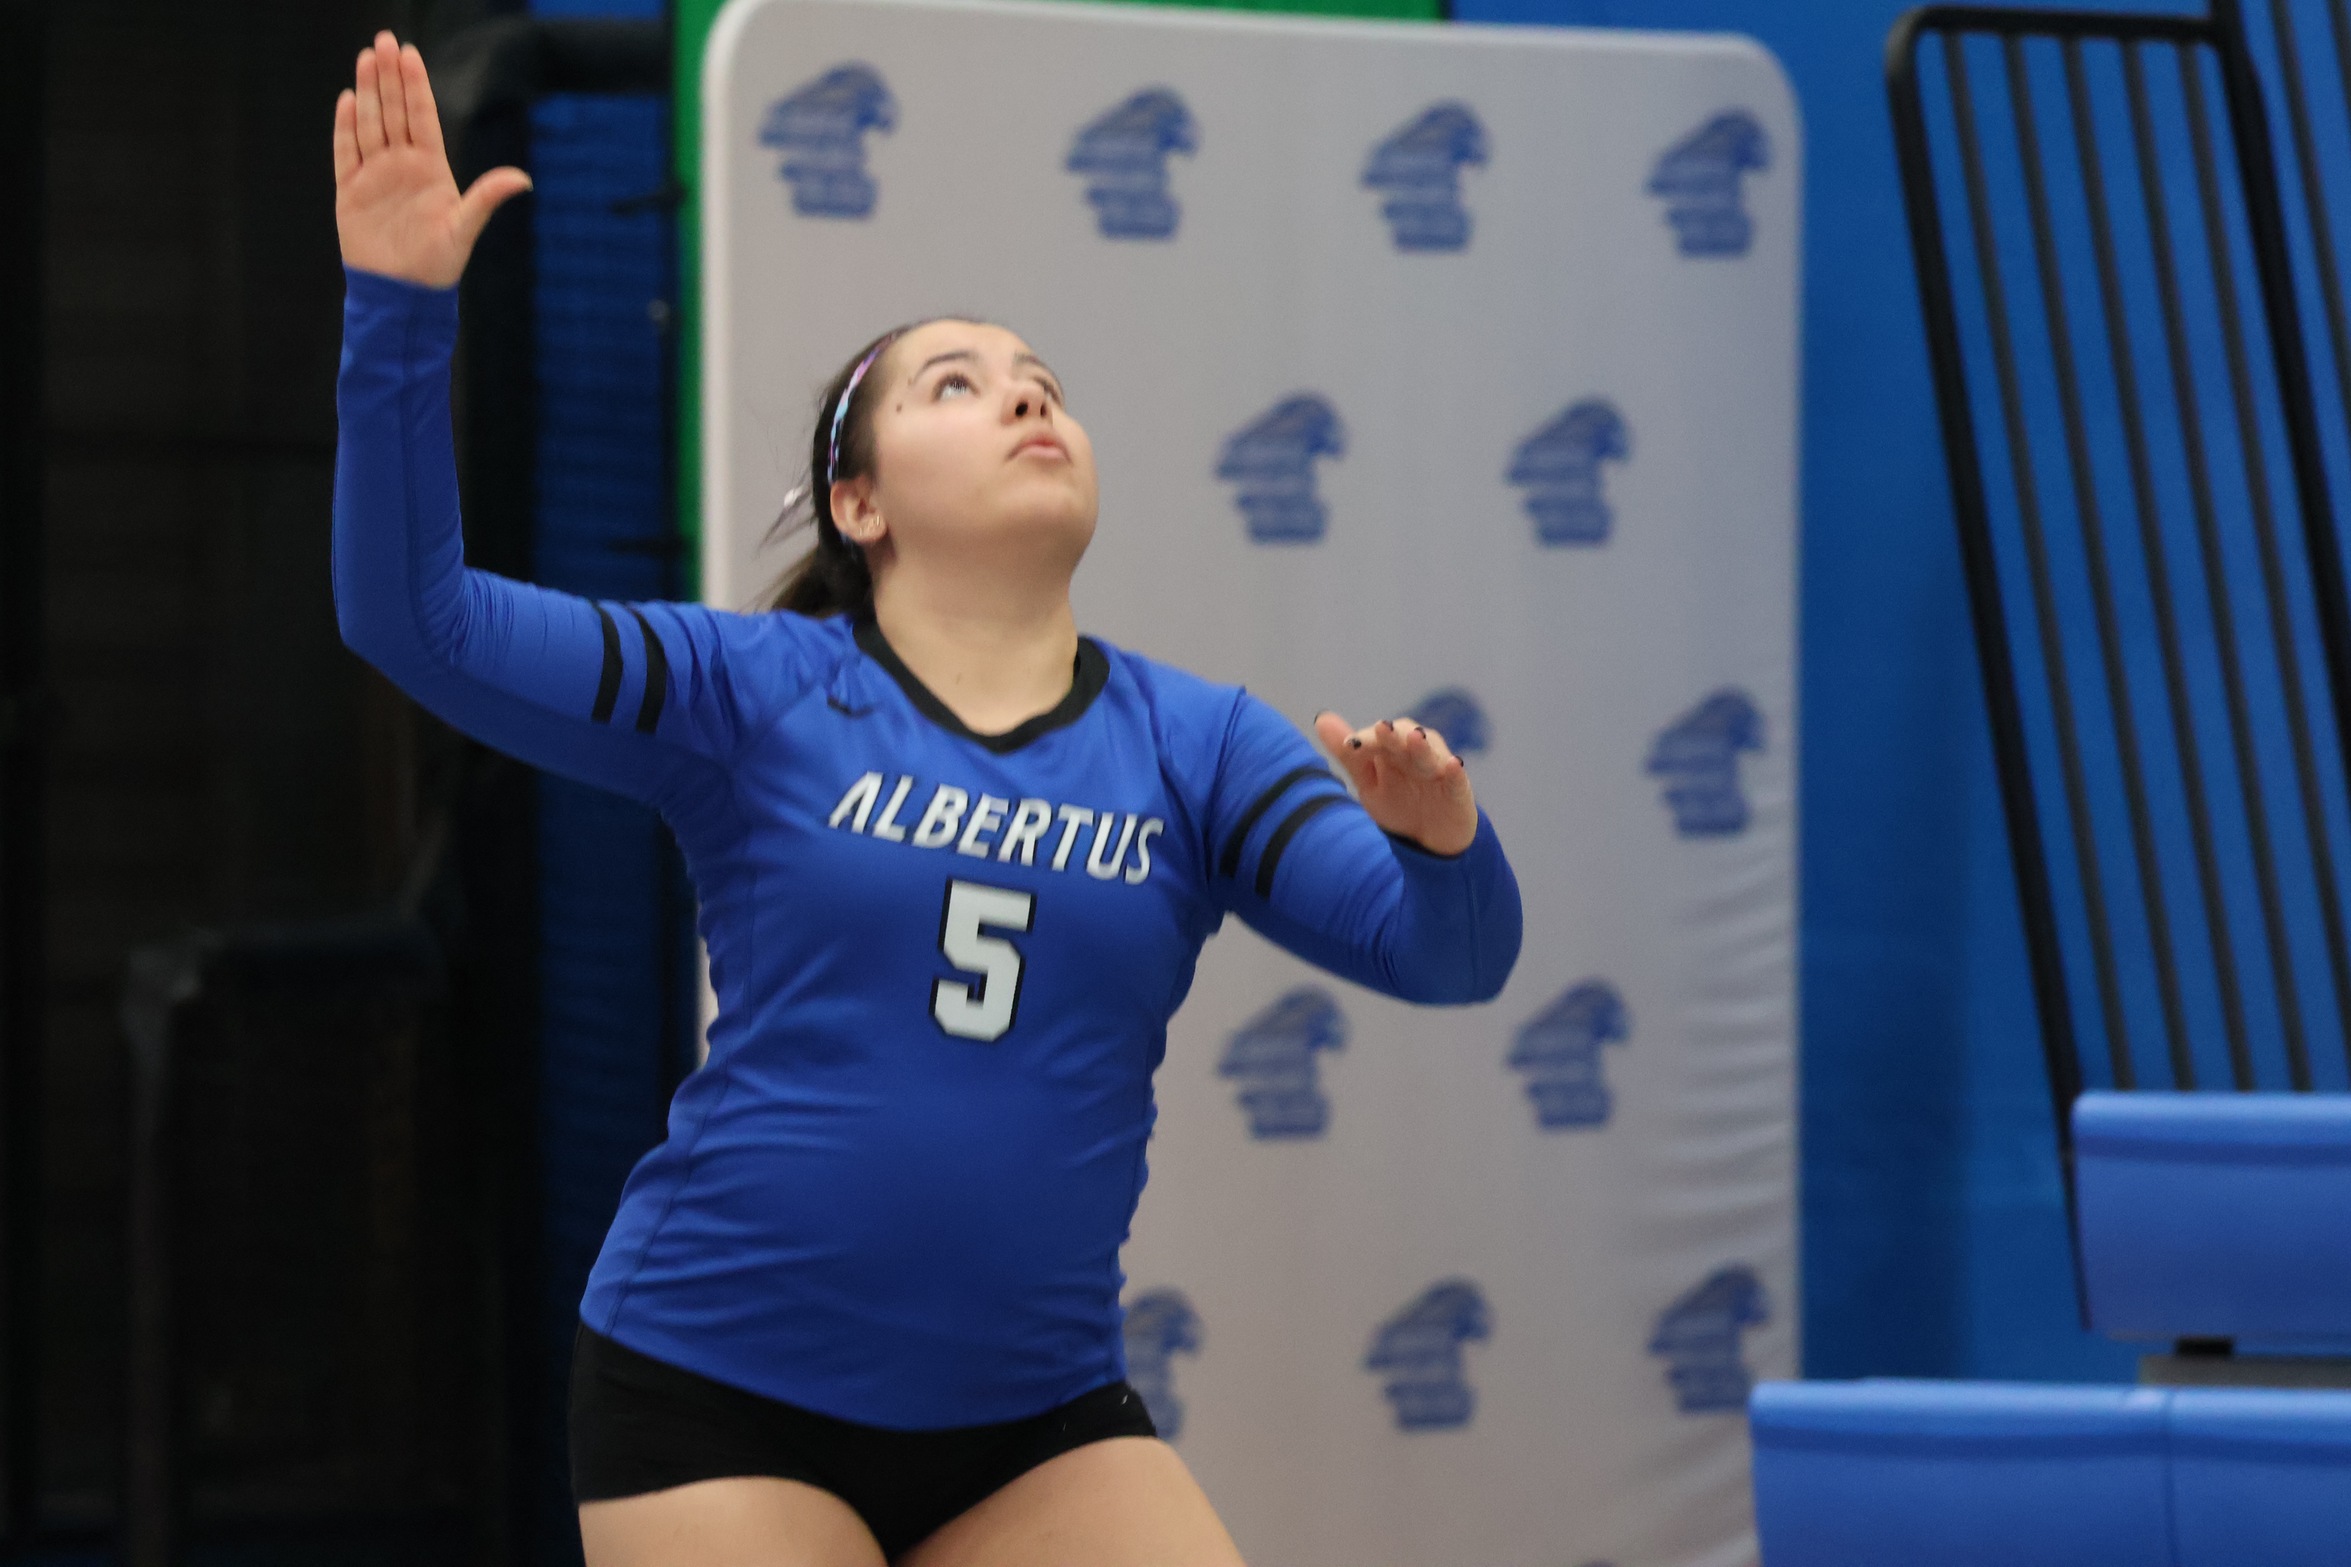 Pelaez Matches Career-High, But Women's Volleyball Lose Tri-Match To NEC And Saint Joseph (Me.)